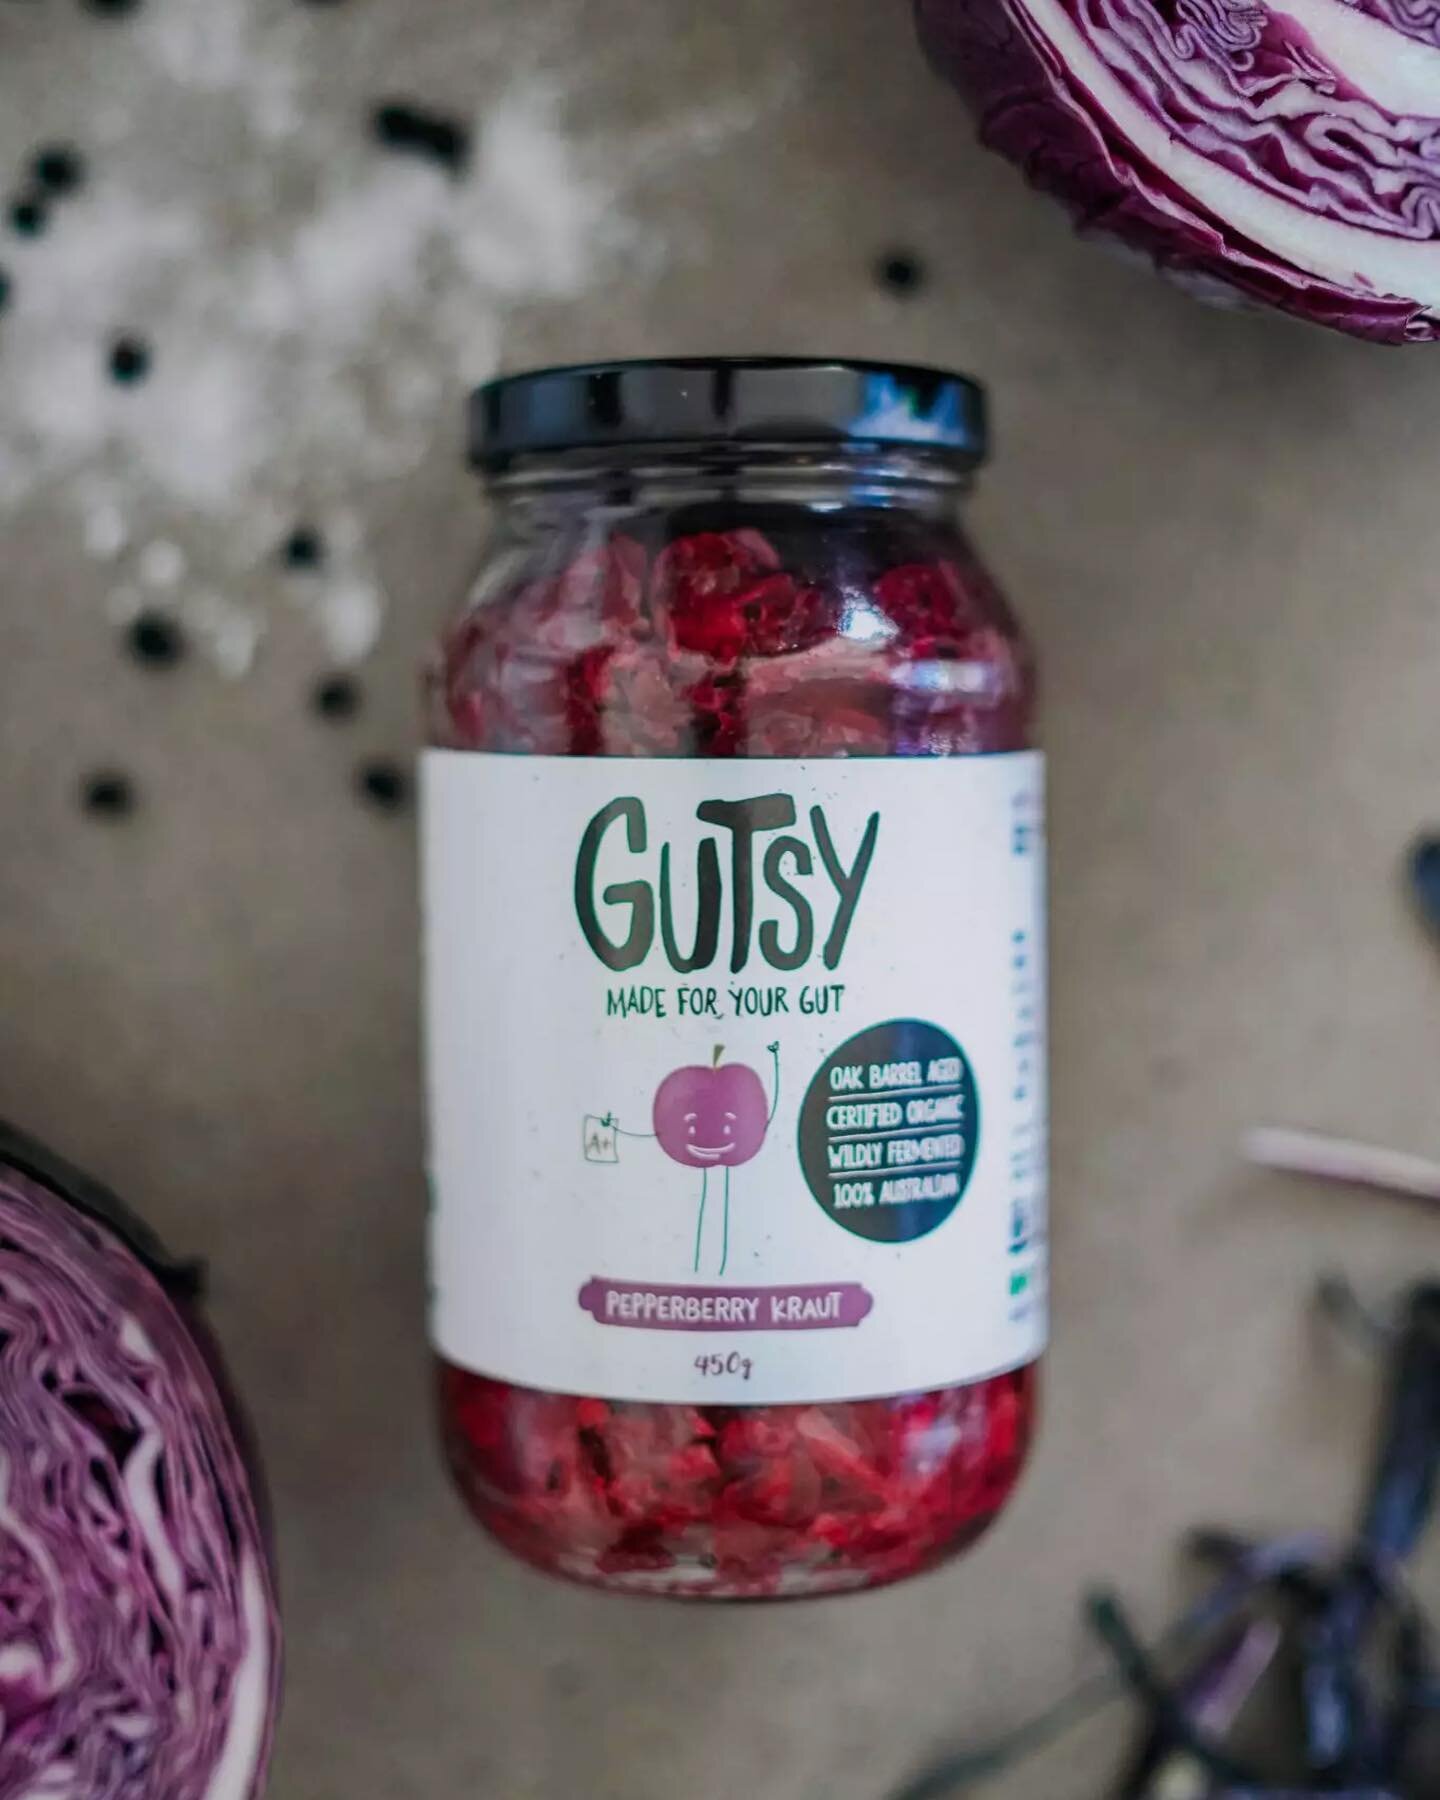 GUTSY Kraut &amp; Kimchi. 

The best fermented vegetables. Why?
- Gusty ferments in oak barrels (no plastics). 
- They are wildly fermented with no artificial cultures. 
- The veggies are slow fermented for weeks not days. 
- Certified organic. 
- Gu